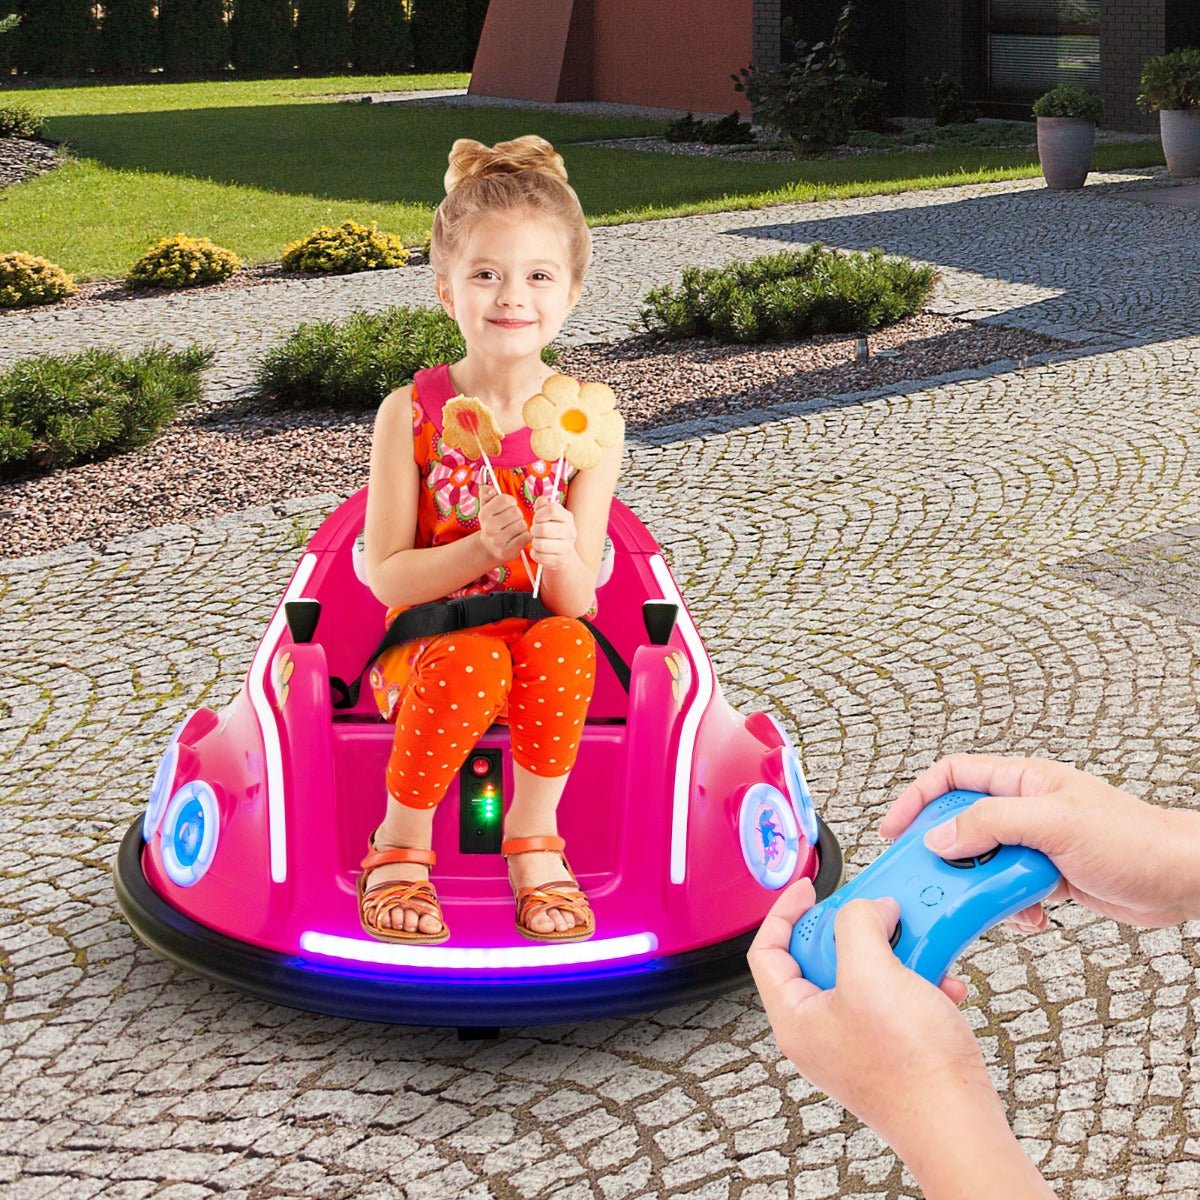 Experience Joy with the Pink Ride-On Bumper Car